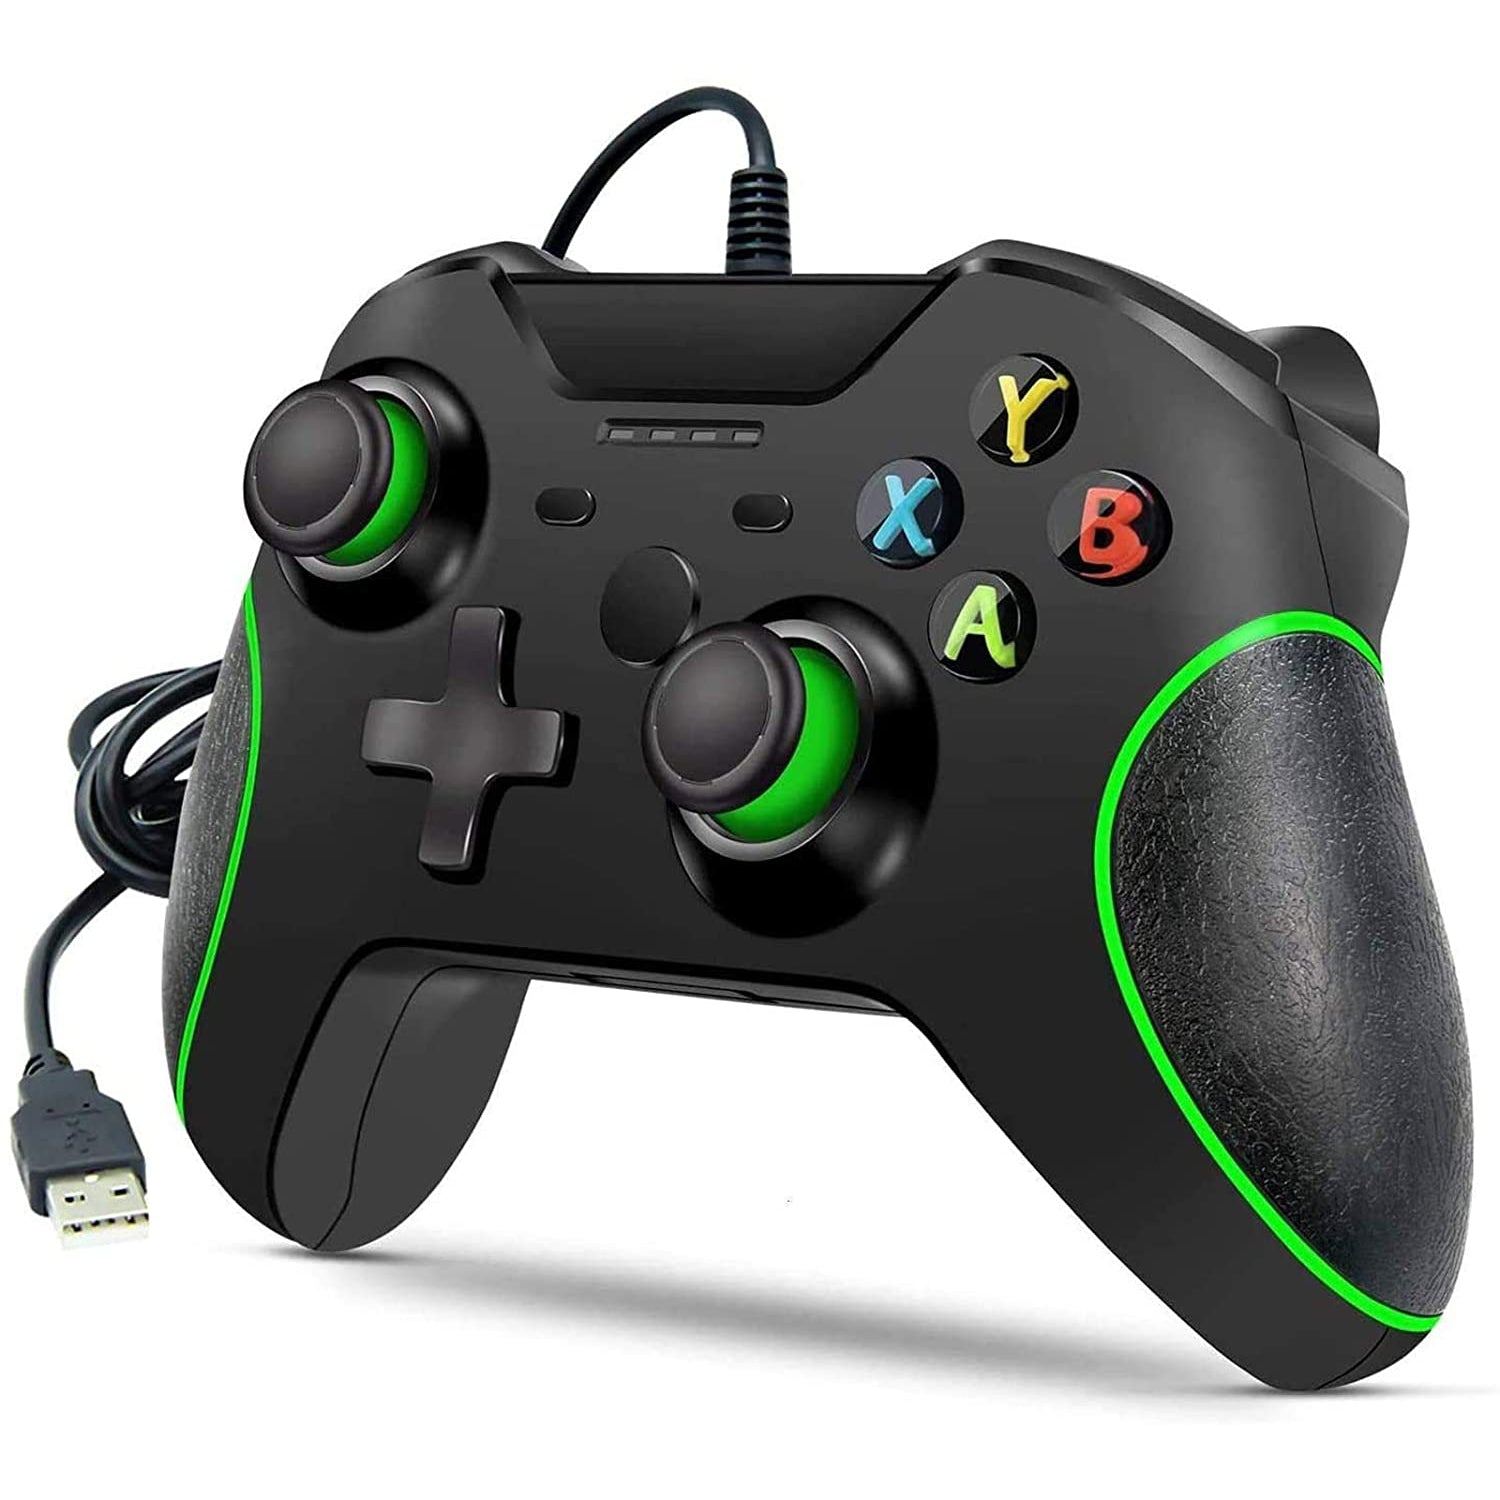 Wired Controller for Xbox One ,Dual Vibration USB Xbox One Wired Game Controller for Xbox One PC Windows 7/8/10 (Black)